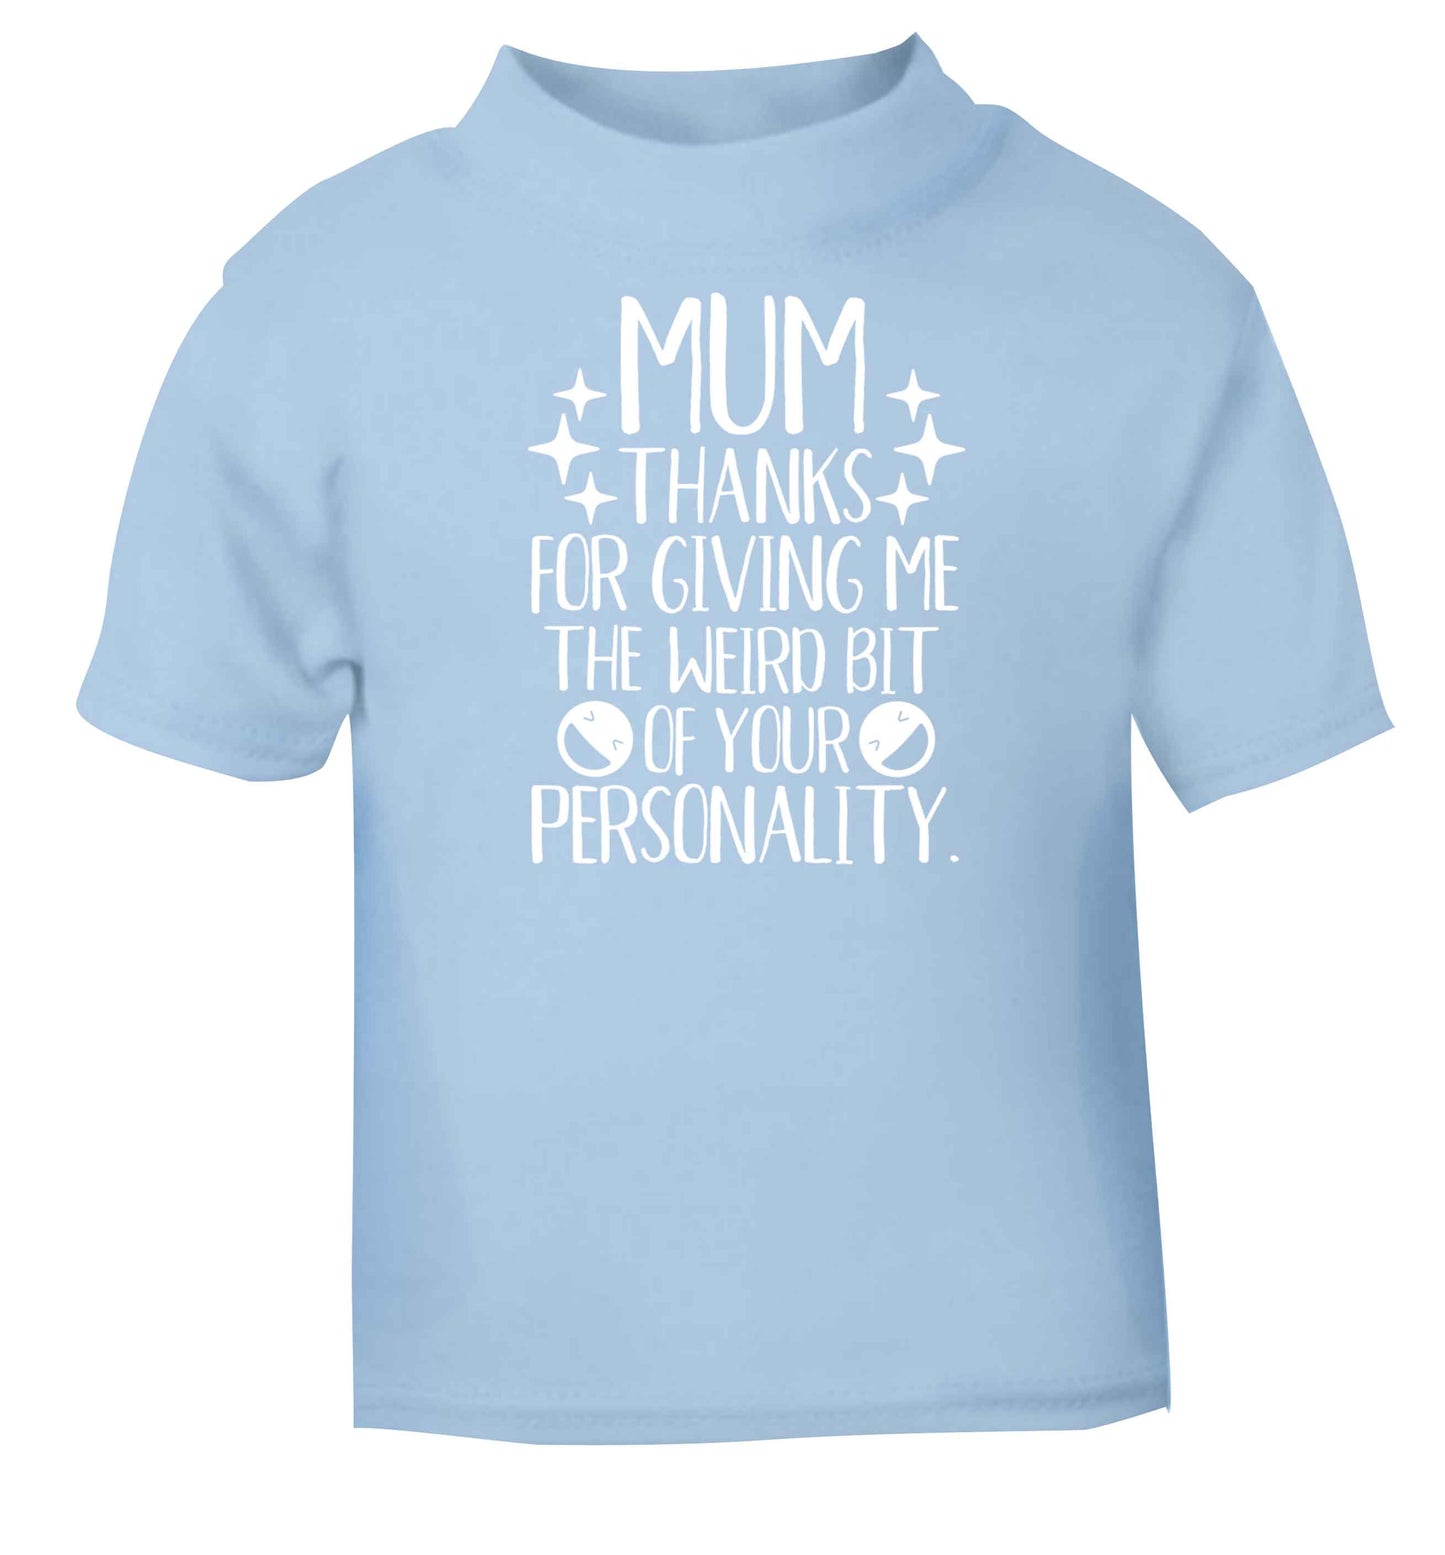 Mum, I love you more than halloumi and if you know me at all you know how deep that is light blue baby toddler Tshirt 2 Years